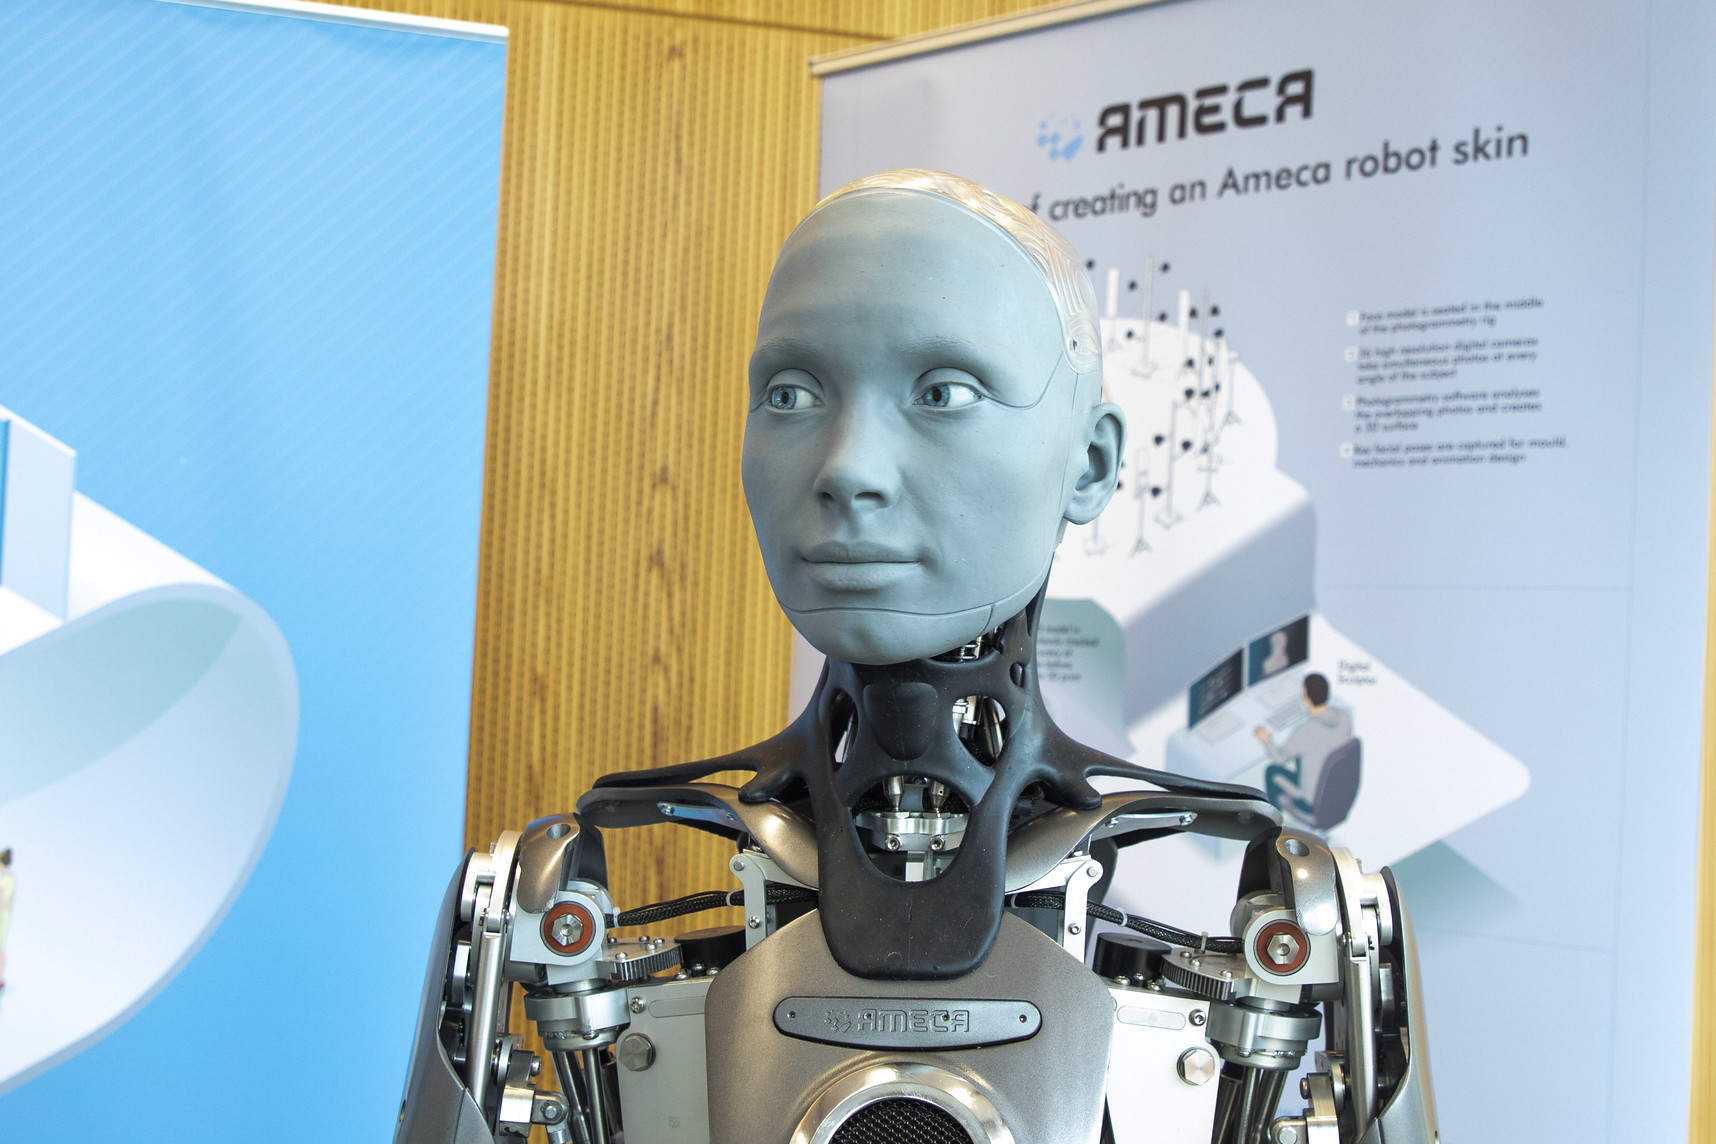 A full size robot with human-like face